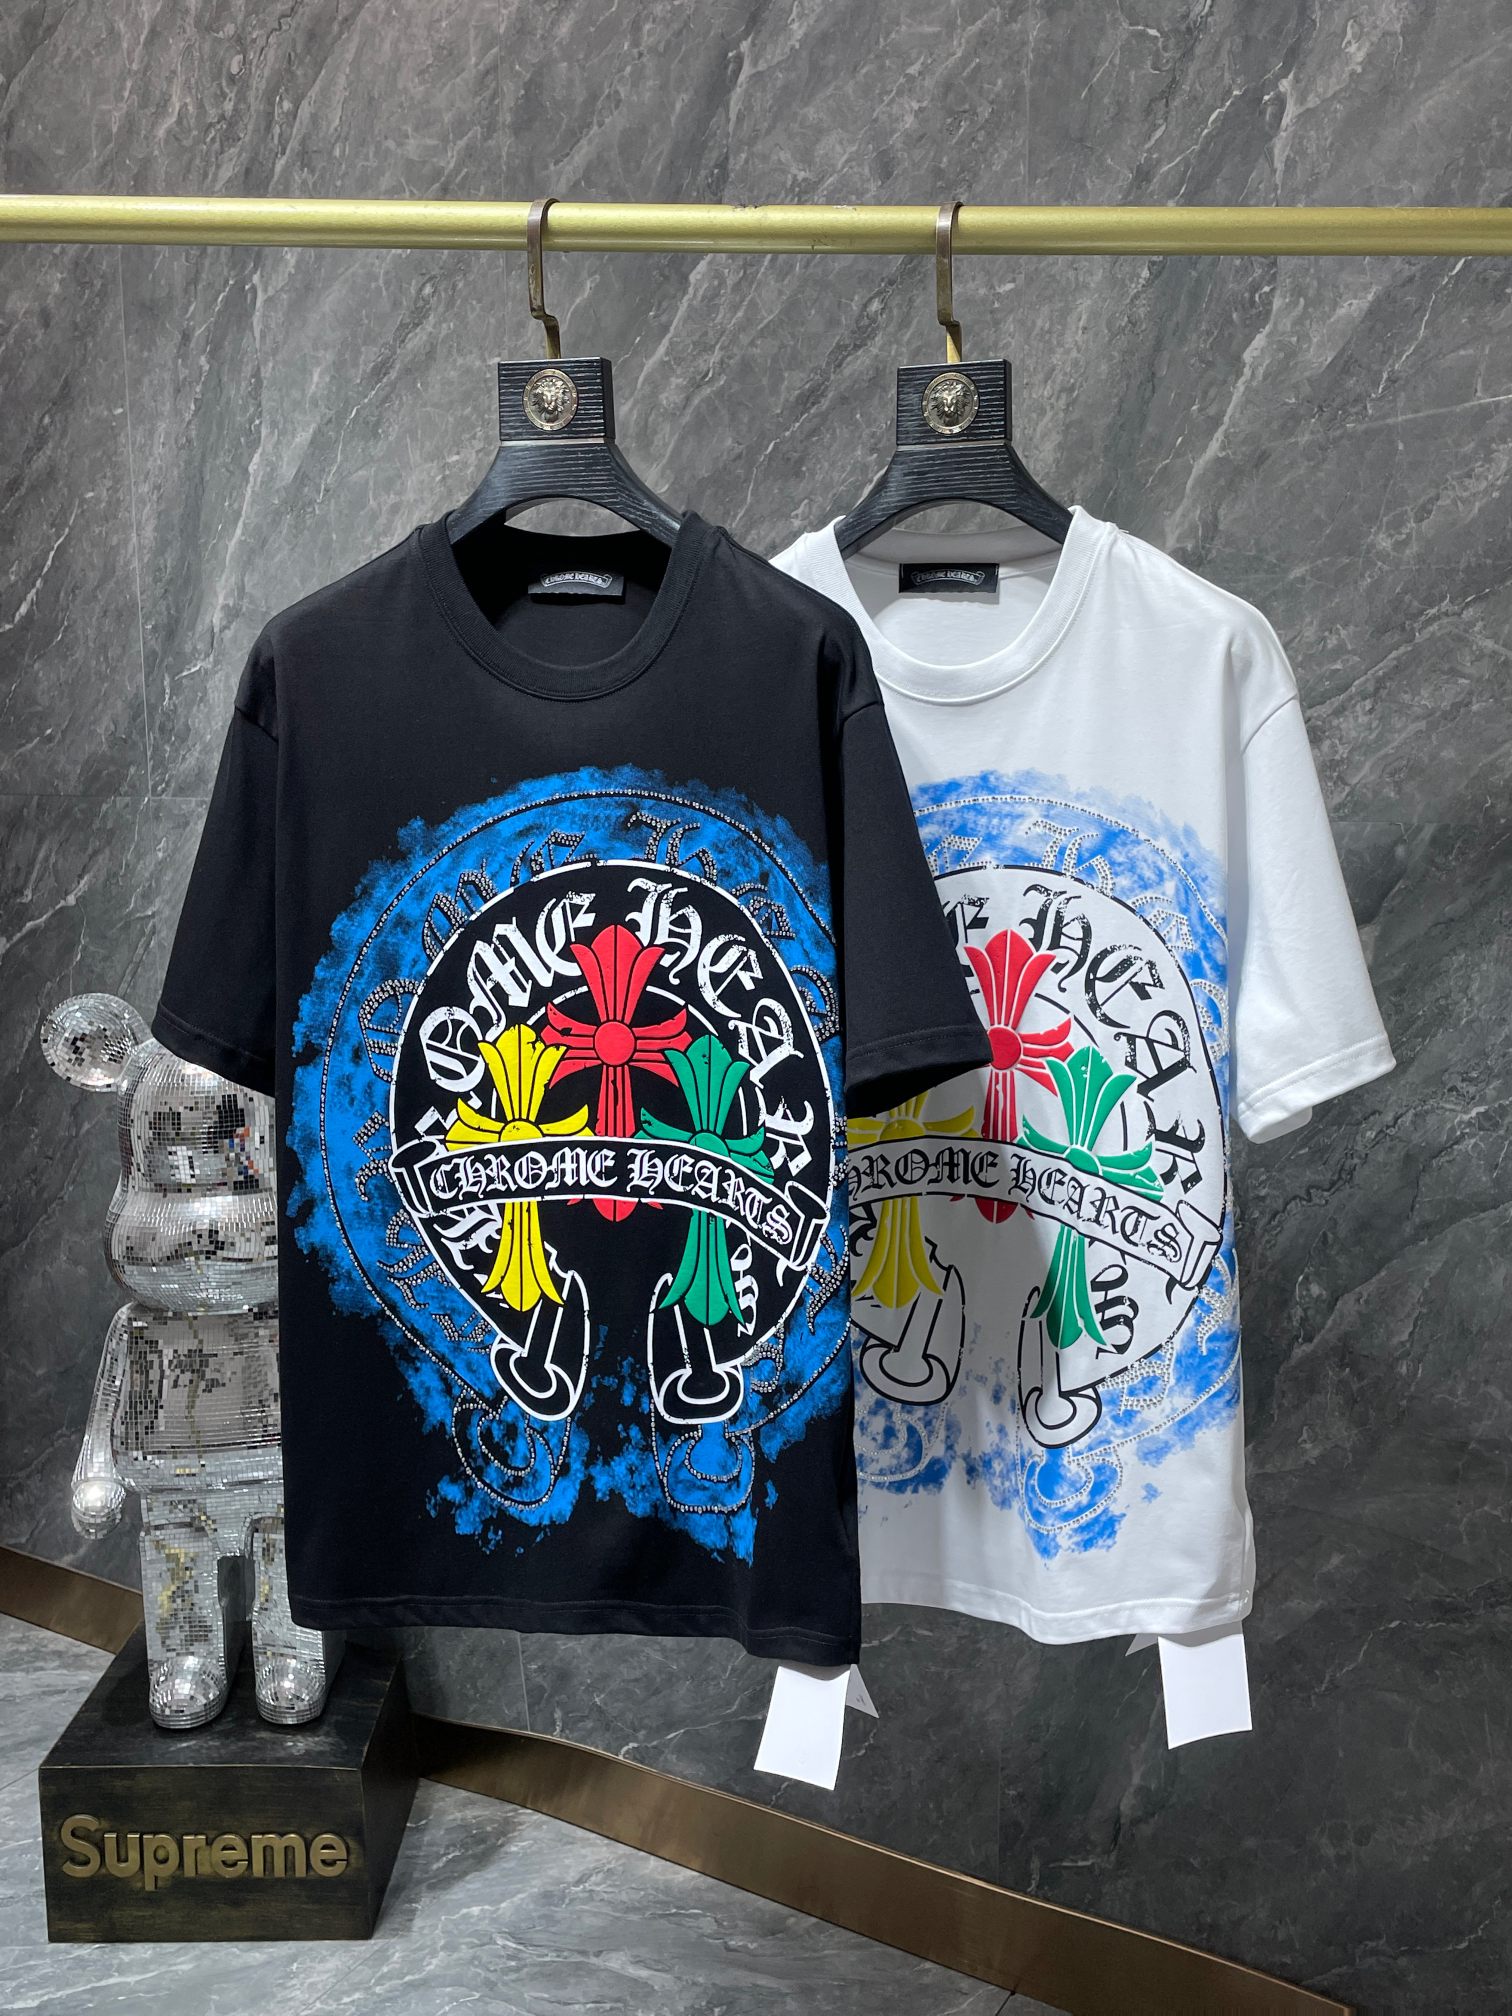 Chrome Hearts Clothing T-Shirt Black White Summer Collection Short Sleeve